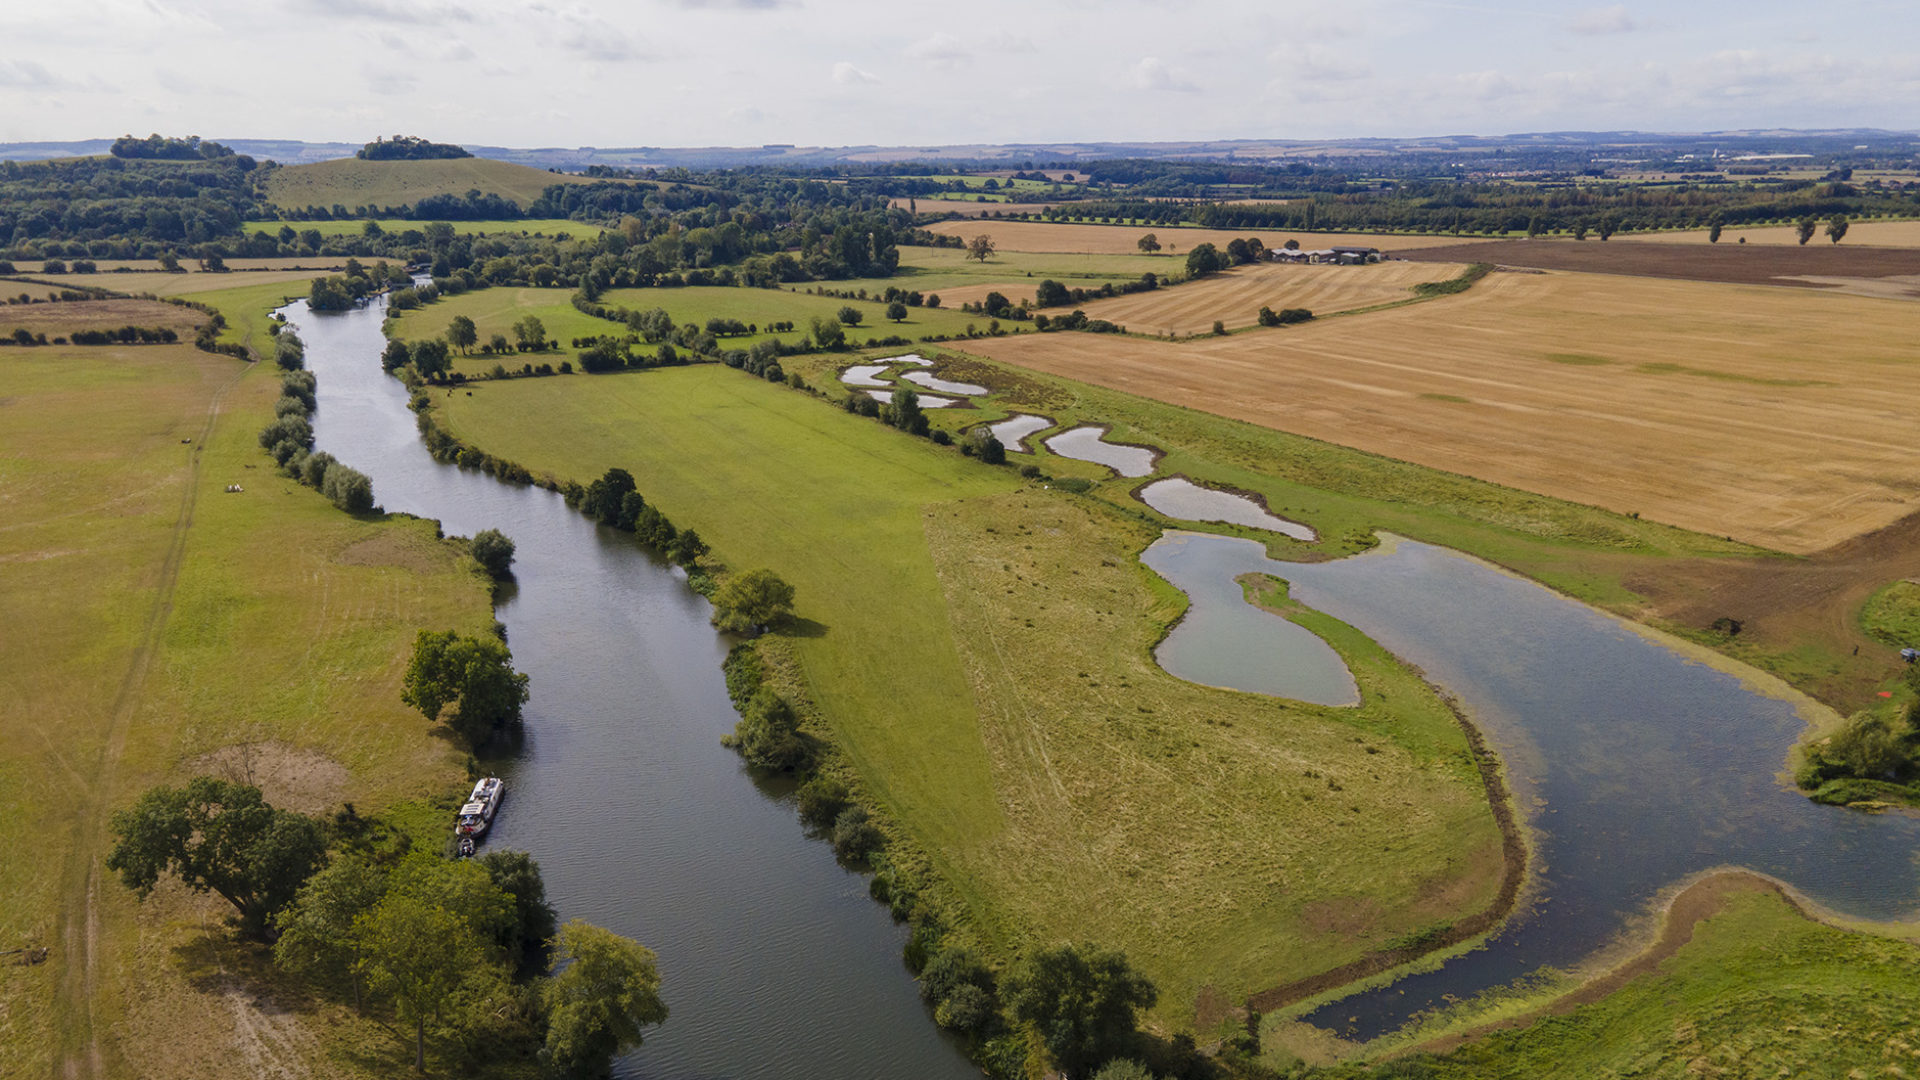 <p>Love wetlands.<br />
Please support our appeal to champion Oxfordshire's precious wetlands. For people, nature and climate.<br />
Donate now</p>
